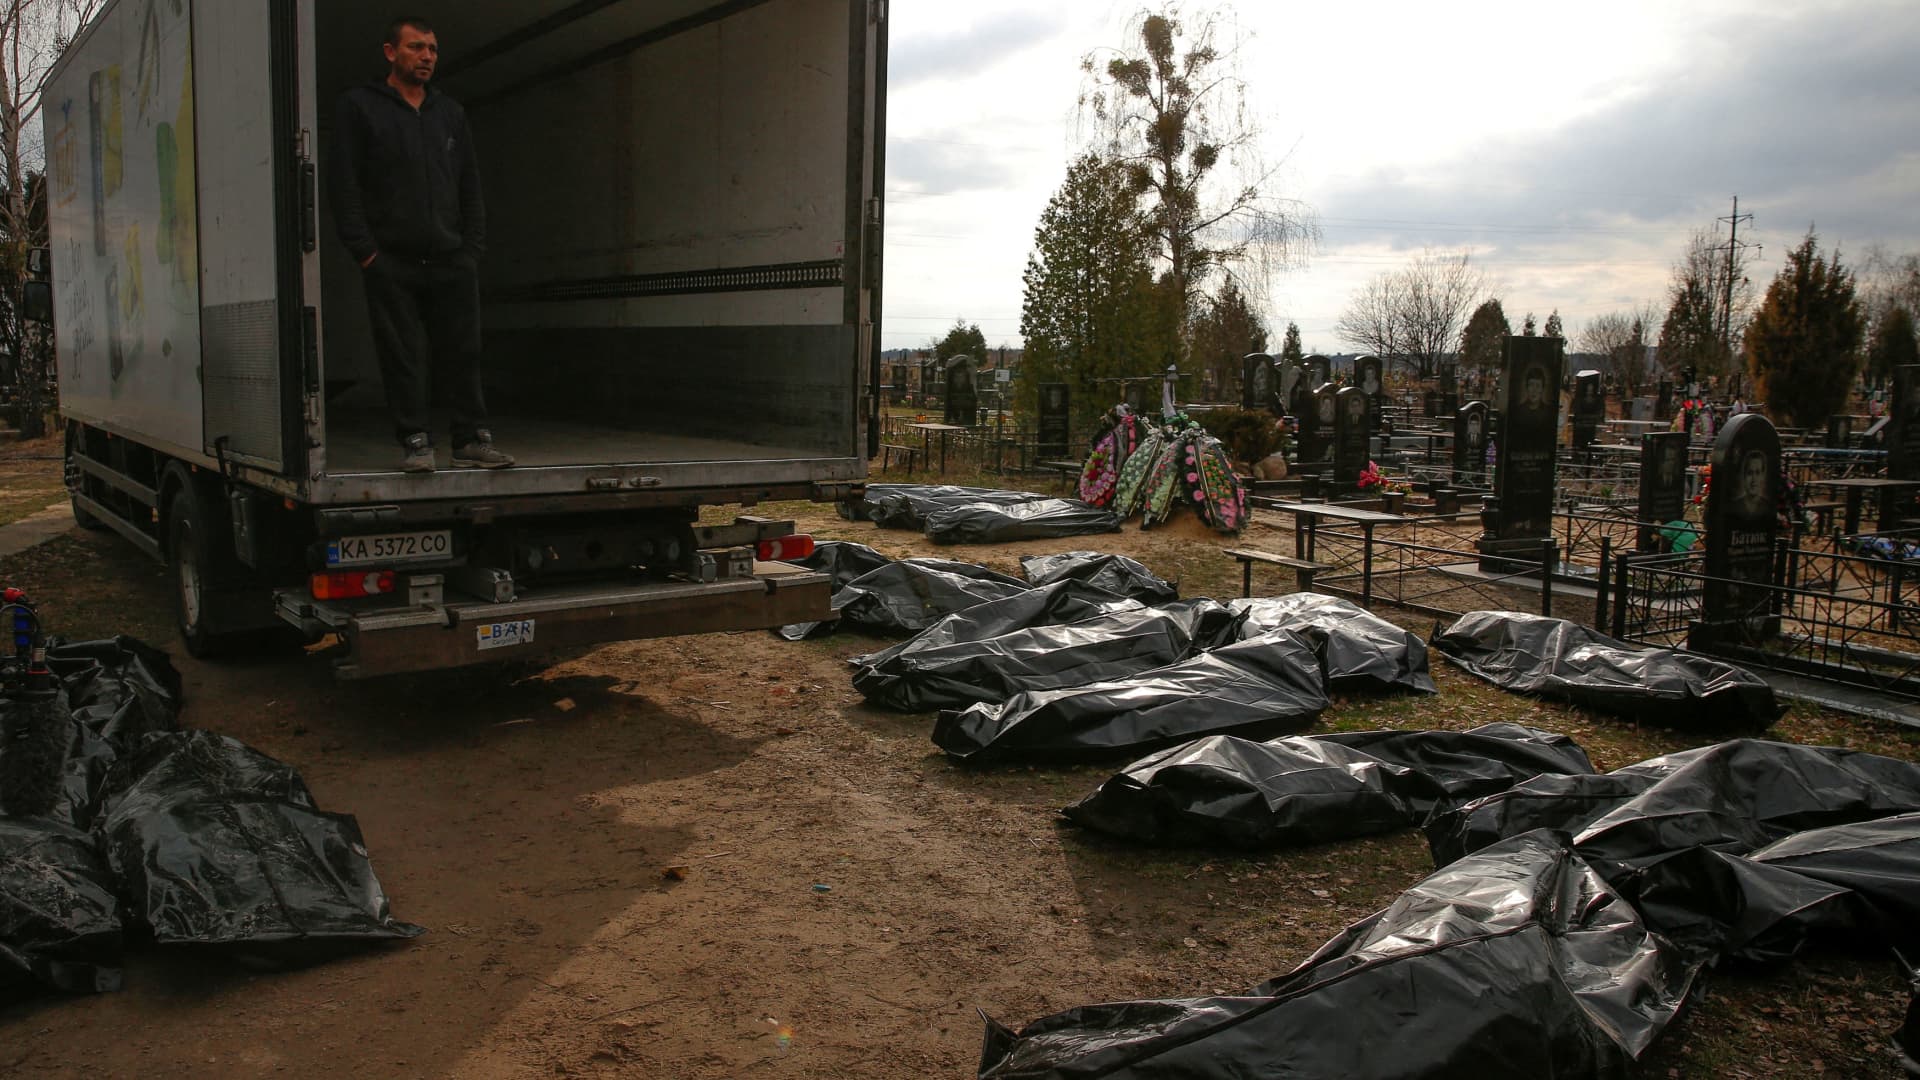 A funeral service employee looks at bodies of civilians, collected from streets to local cemetery, as Russia's attack on Ukraine continues, in the town of Bucha, outside Kyiv, Ukraine April 6, 2022.